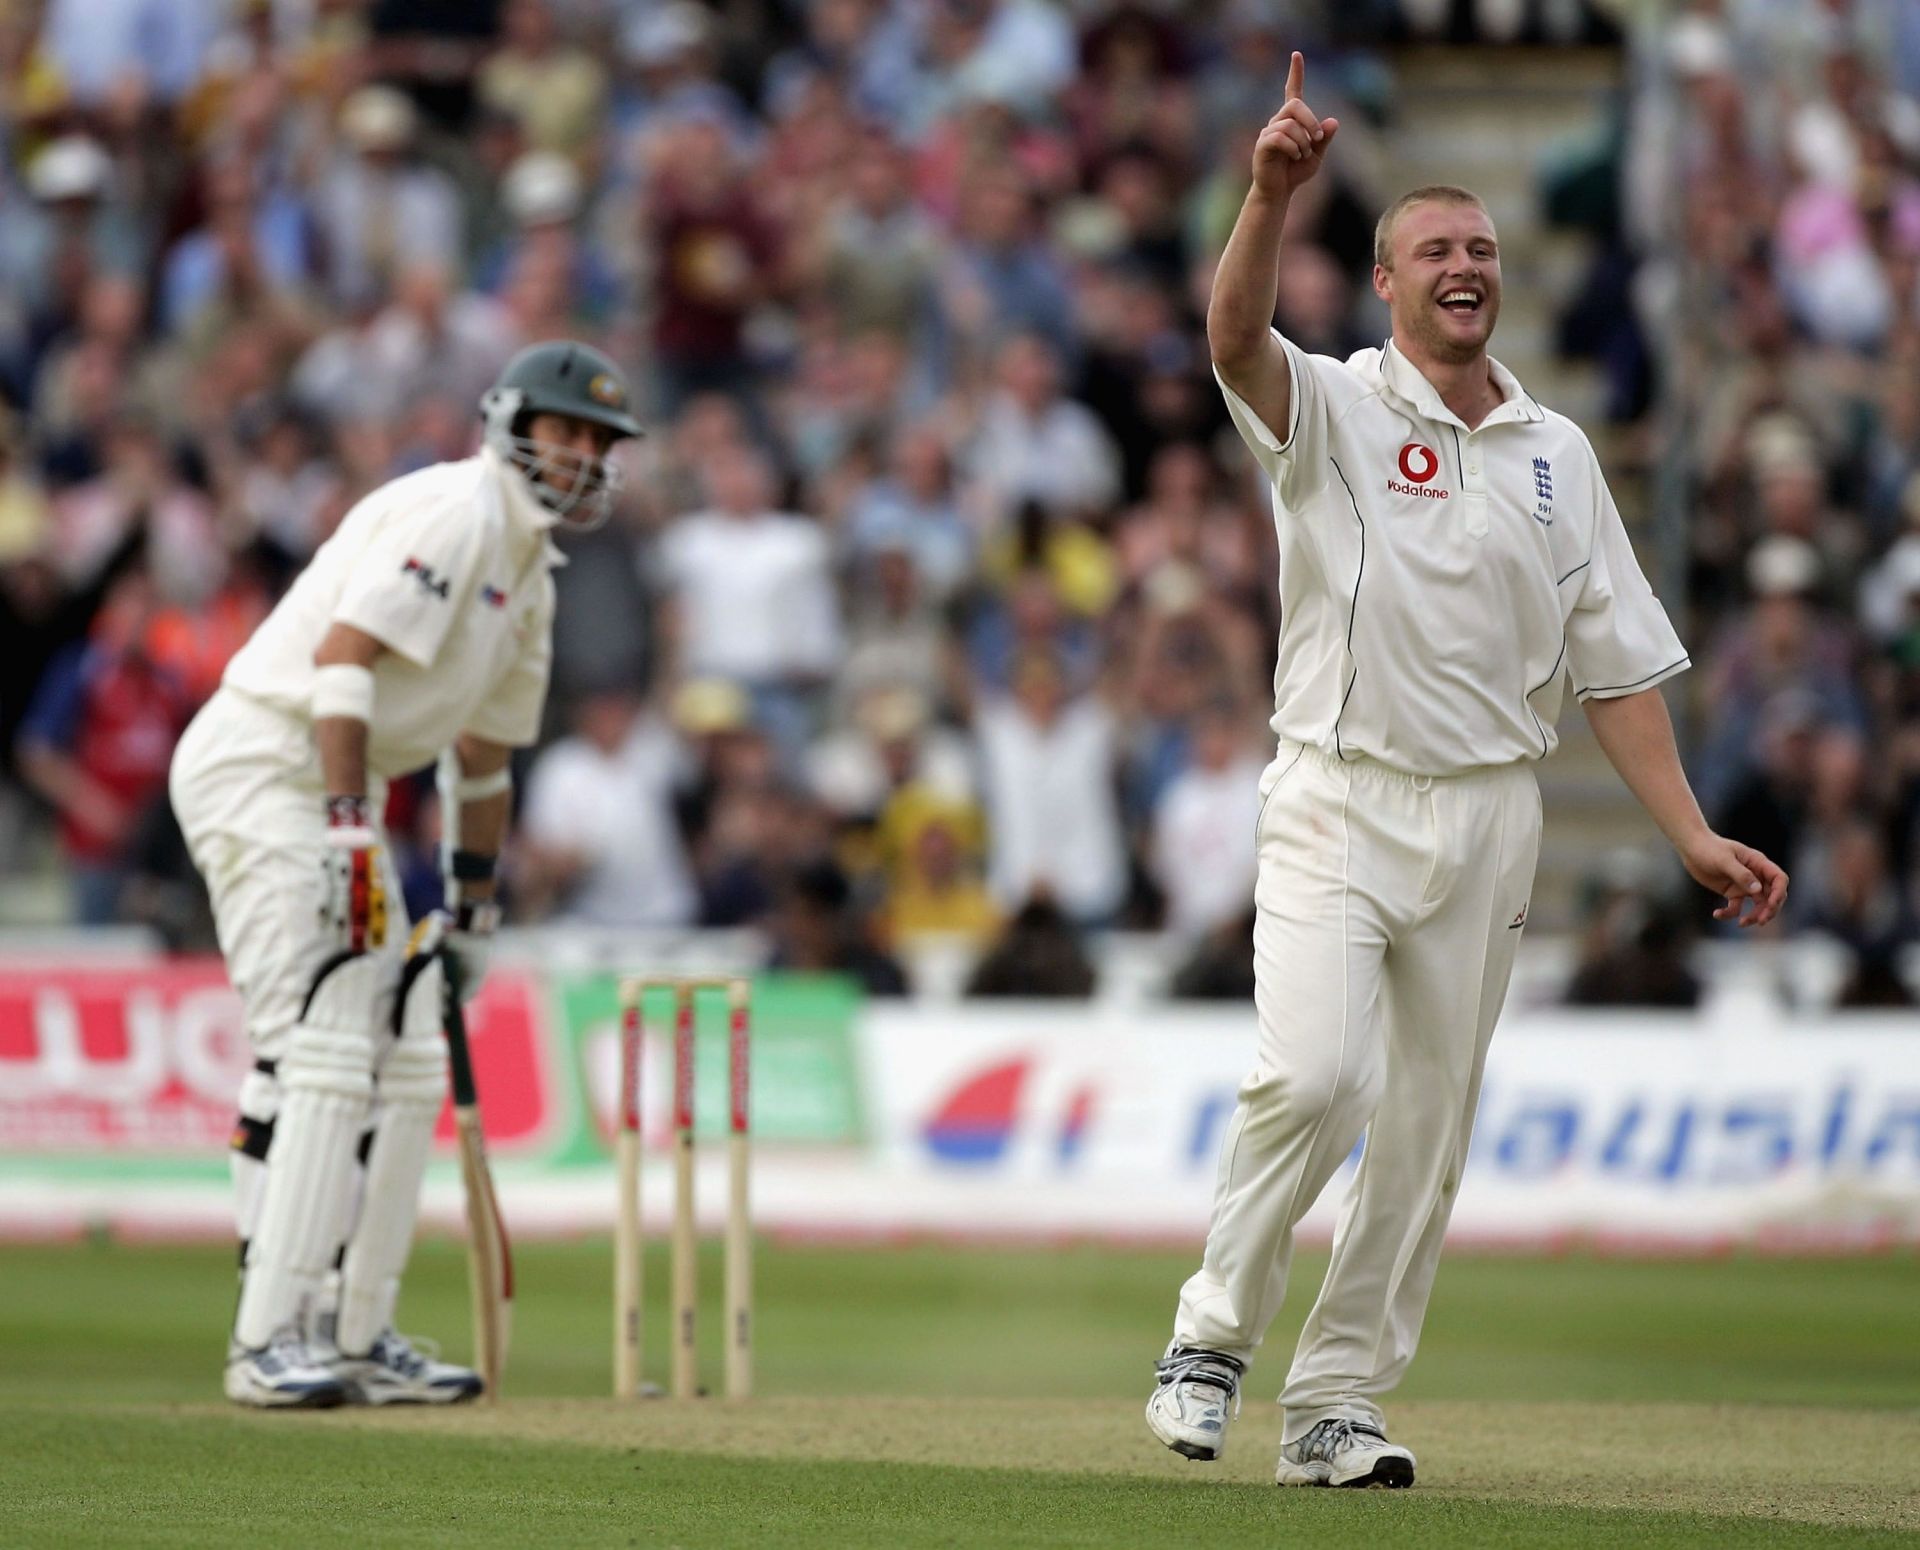 Andrew Flintoff was exceptional in the 2005 series. (Pic: Getty Images)